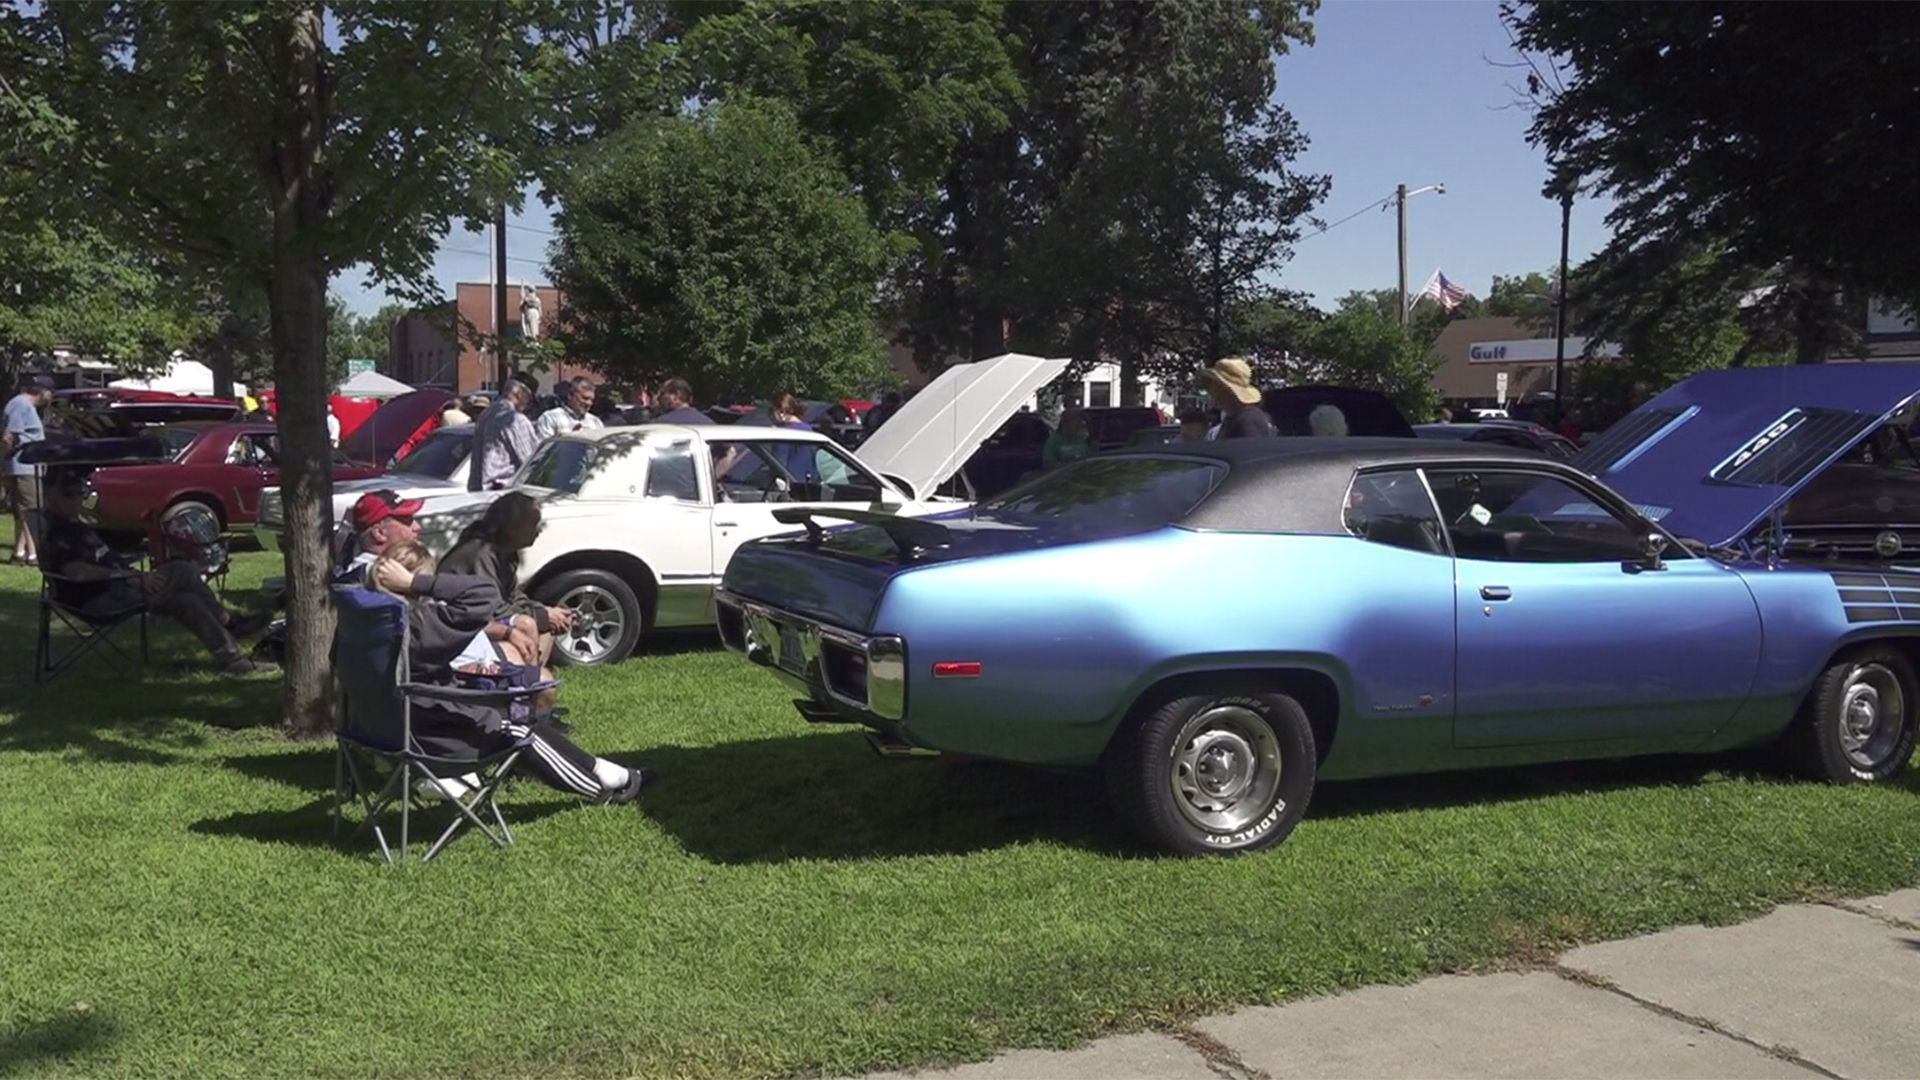 Swanton Car Show returns for 13th year